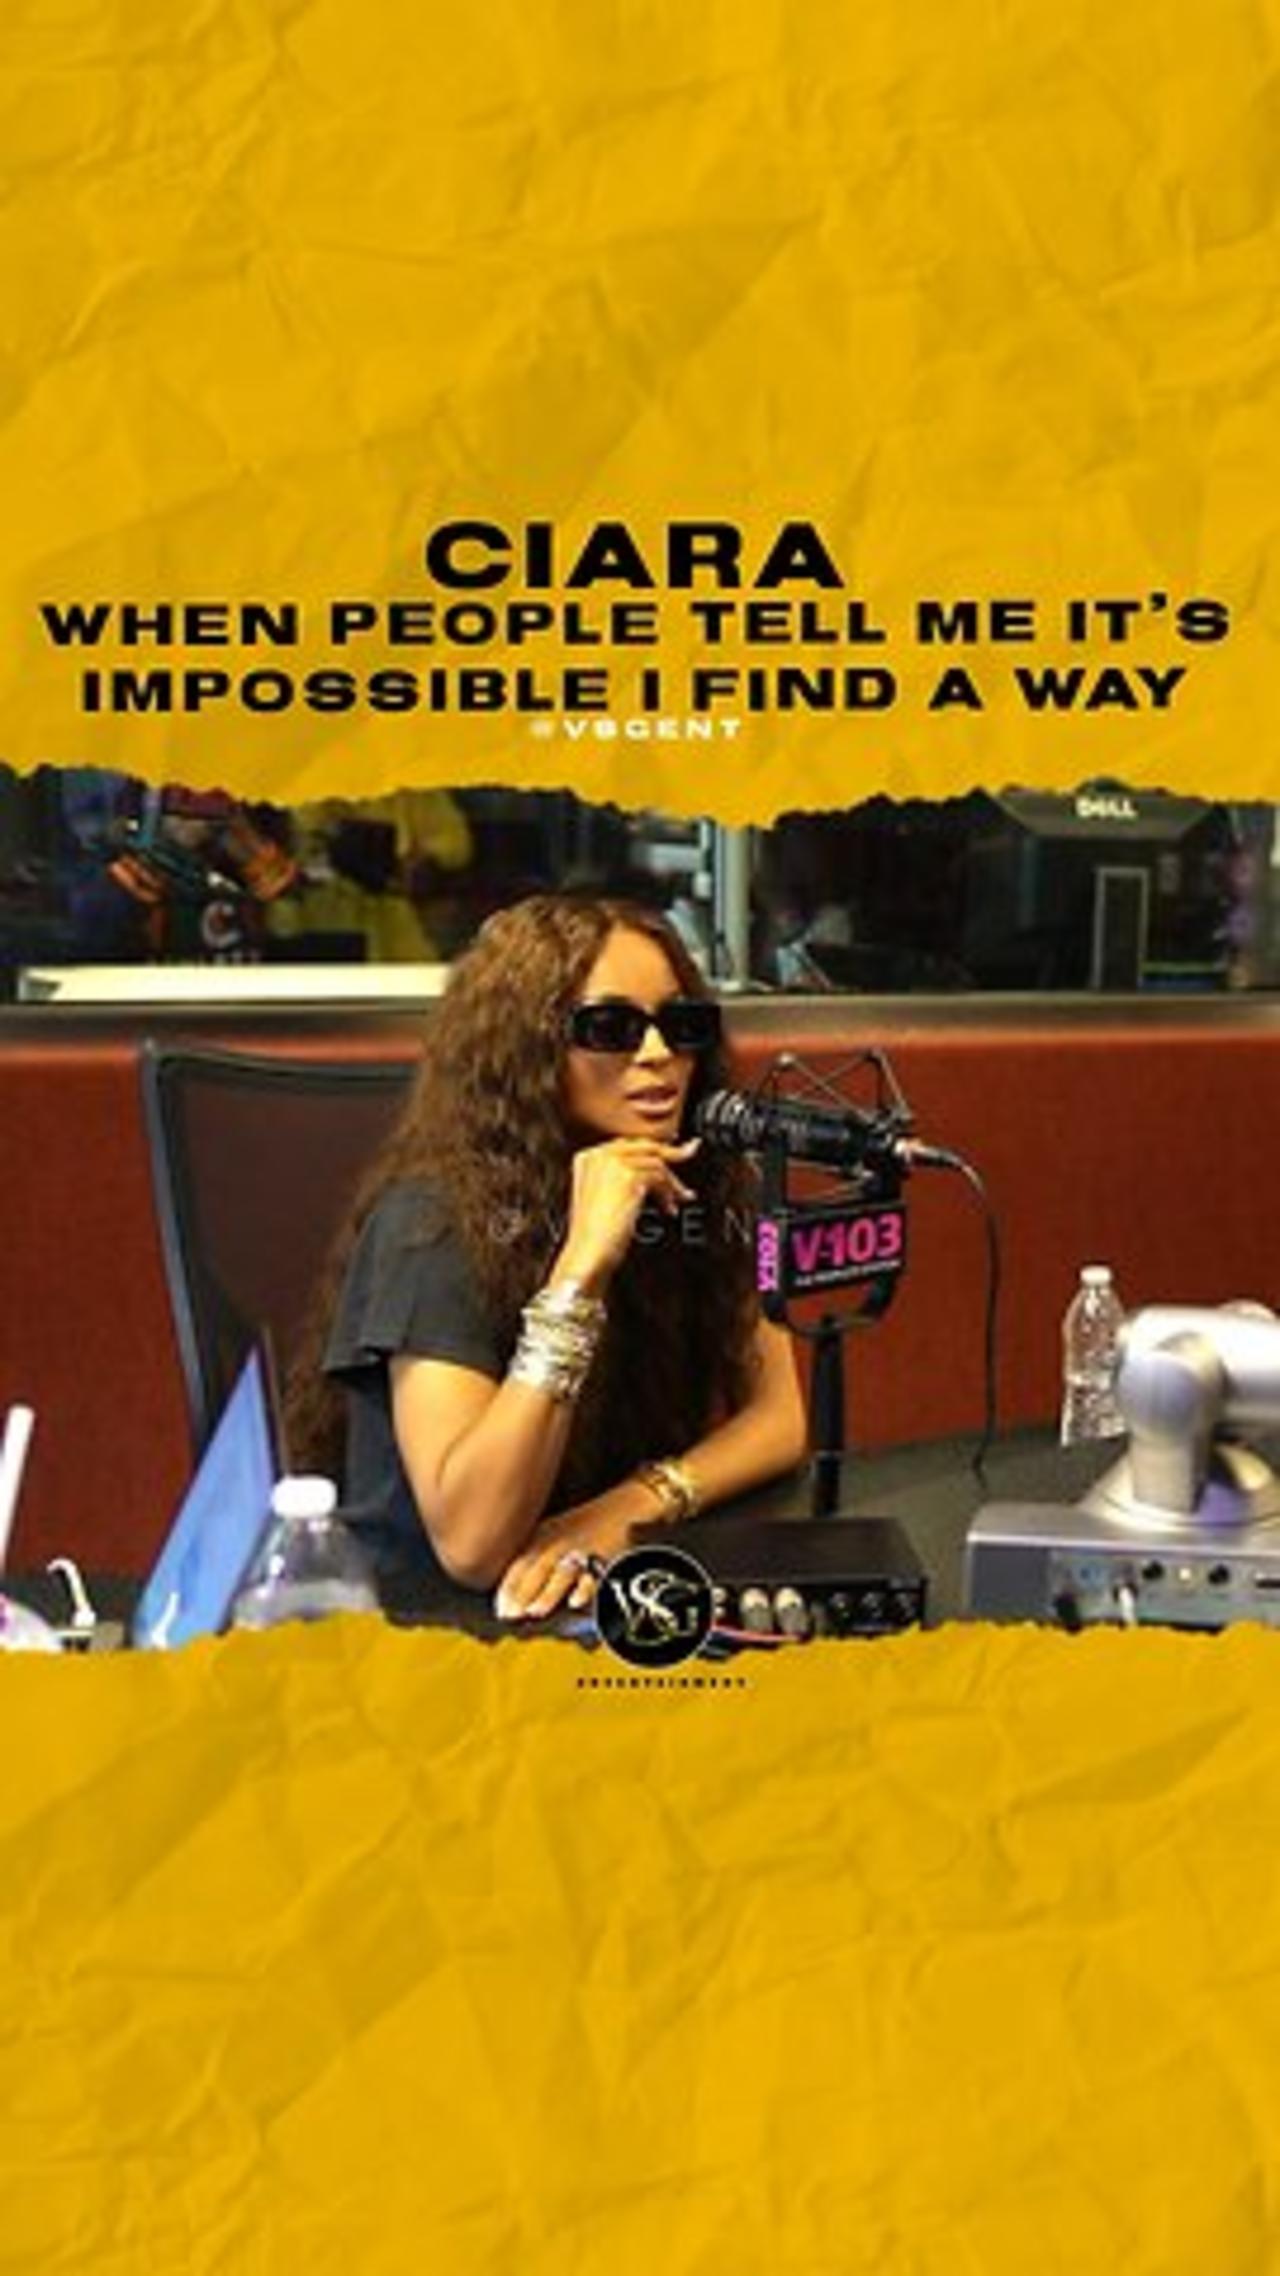 @ciara When people tell me it’s impossible I find a way